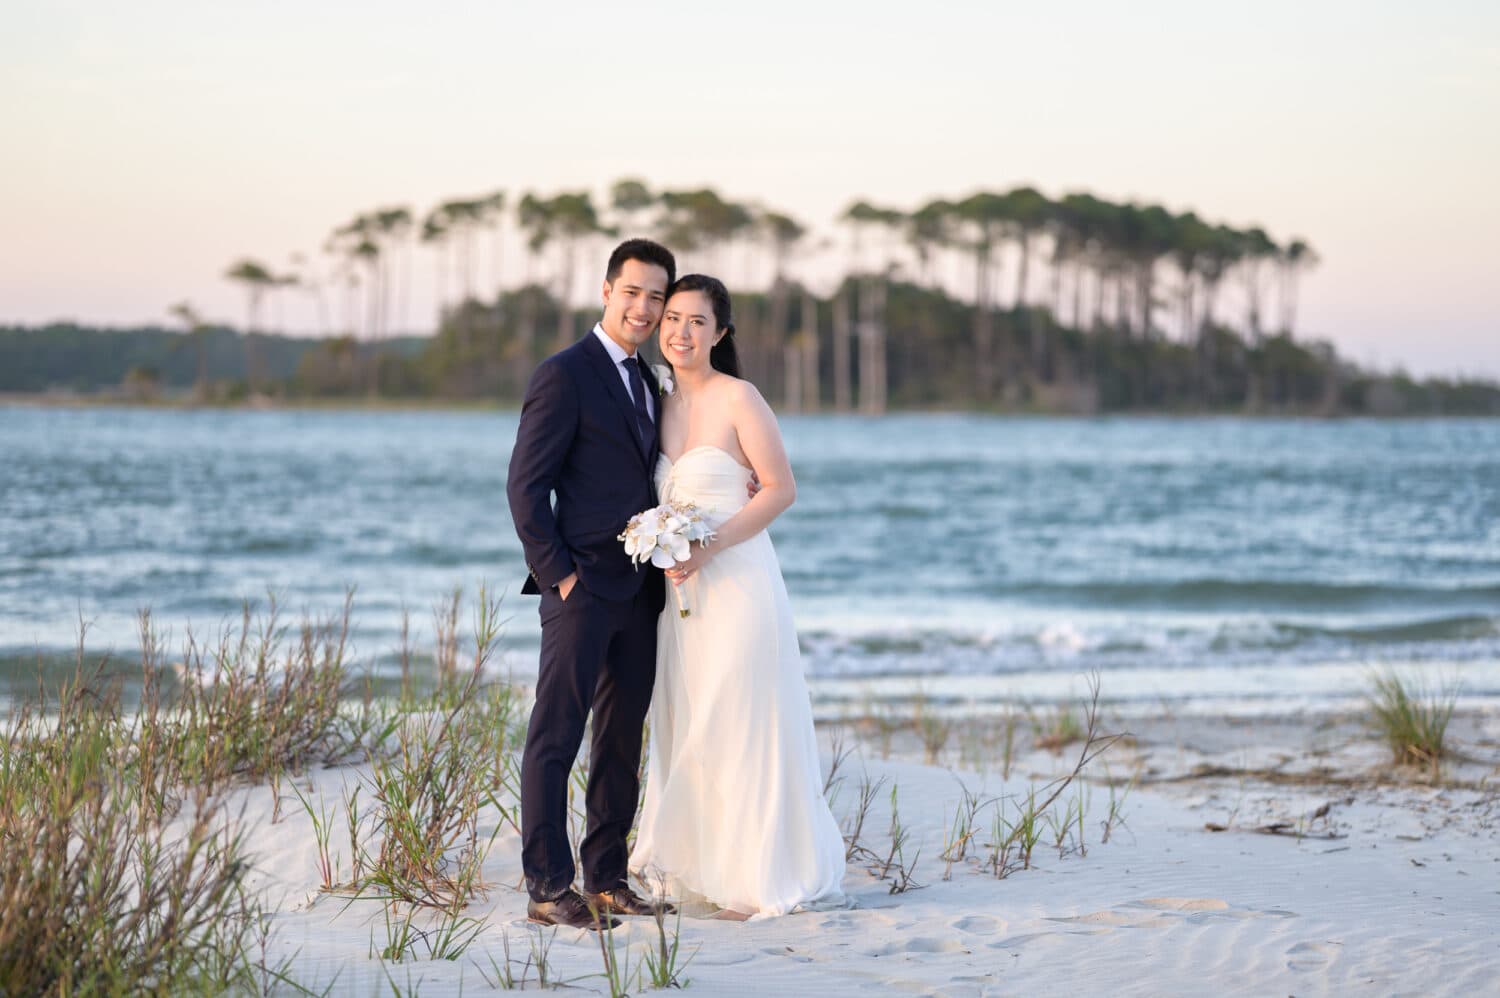 Just married couple at sunset with an island in the background - Cherry Grove Point - North Myrtle Beach